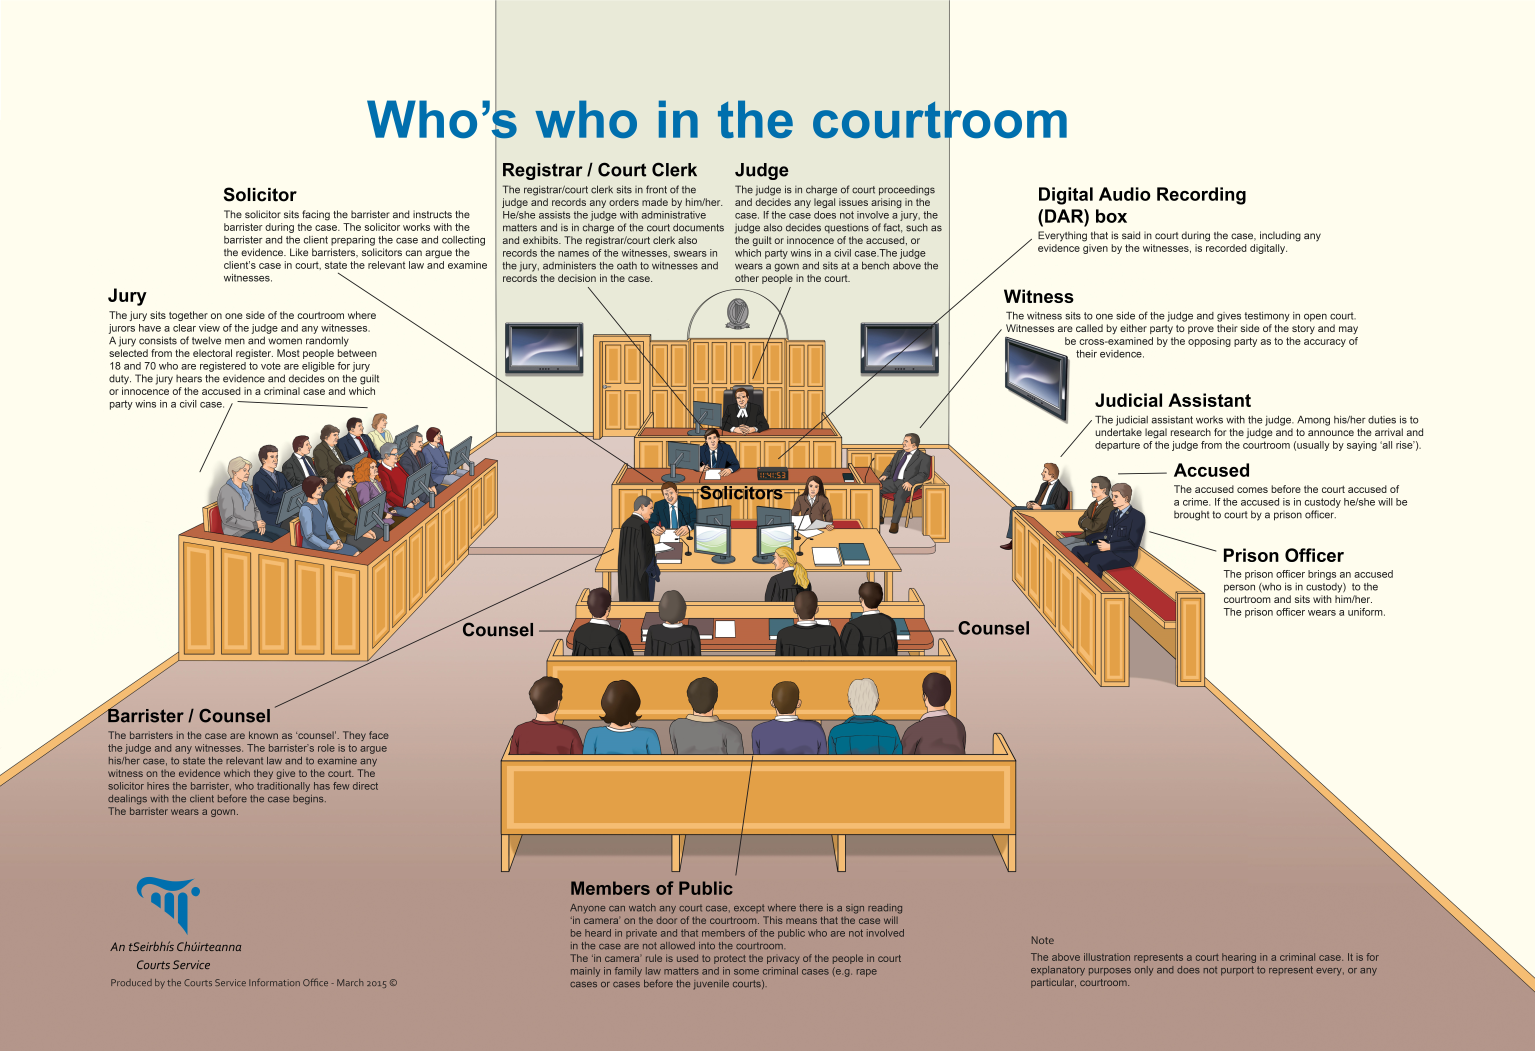 Roles of the people in the courtroom